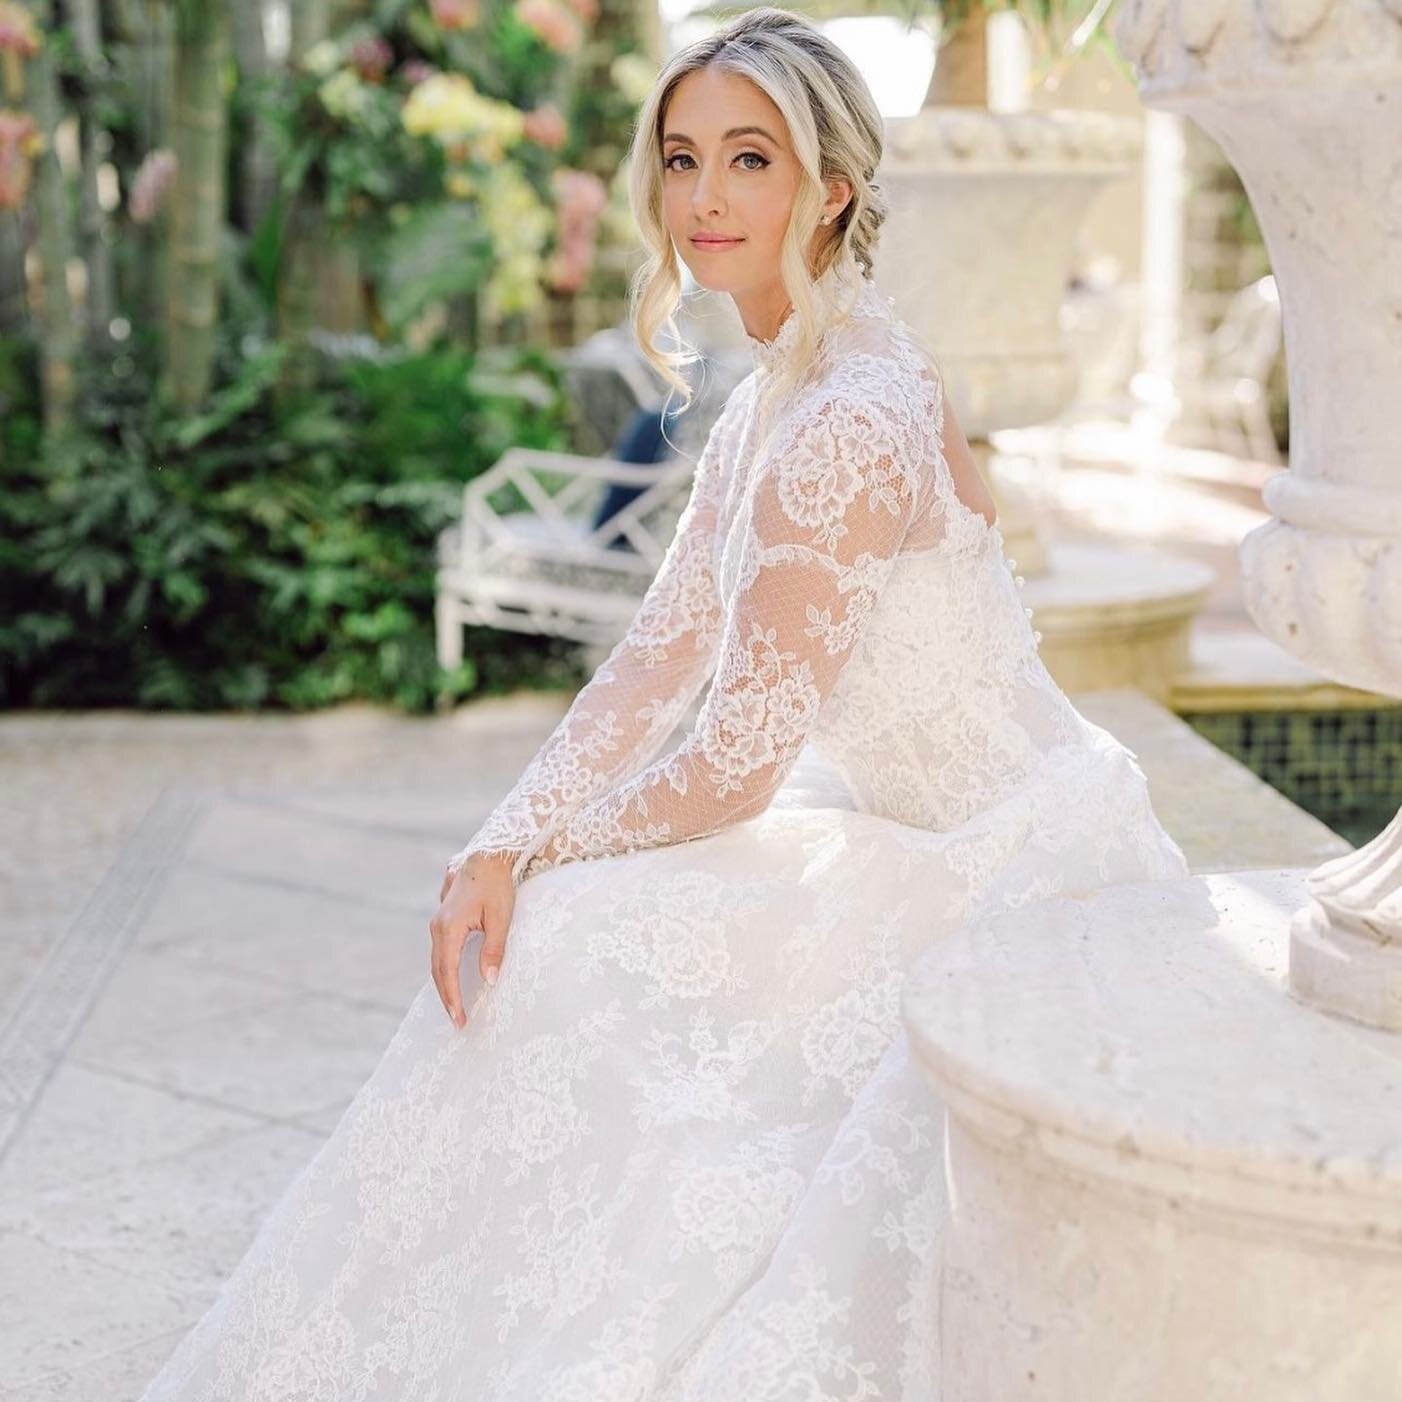 Beautiful @rachel.dinucci in her custom @moniquelhuillierbride was the definition of the perfect and beautiful bride.  Her style is timeless. We love everything about her portraits. @shannons_photo @breakerswedding #sarareneeevents #moniquelhuillier 